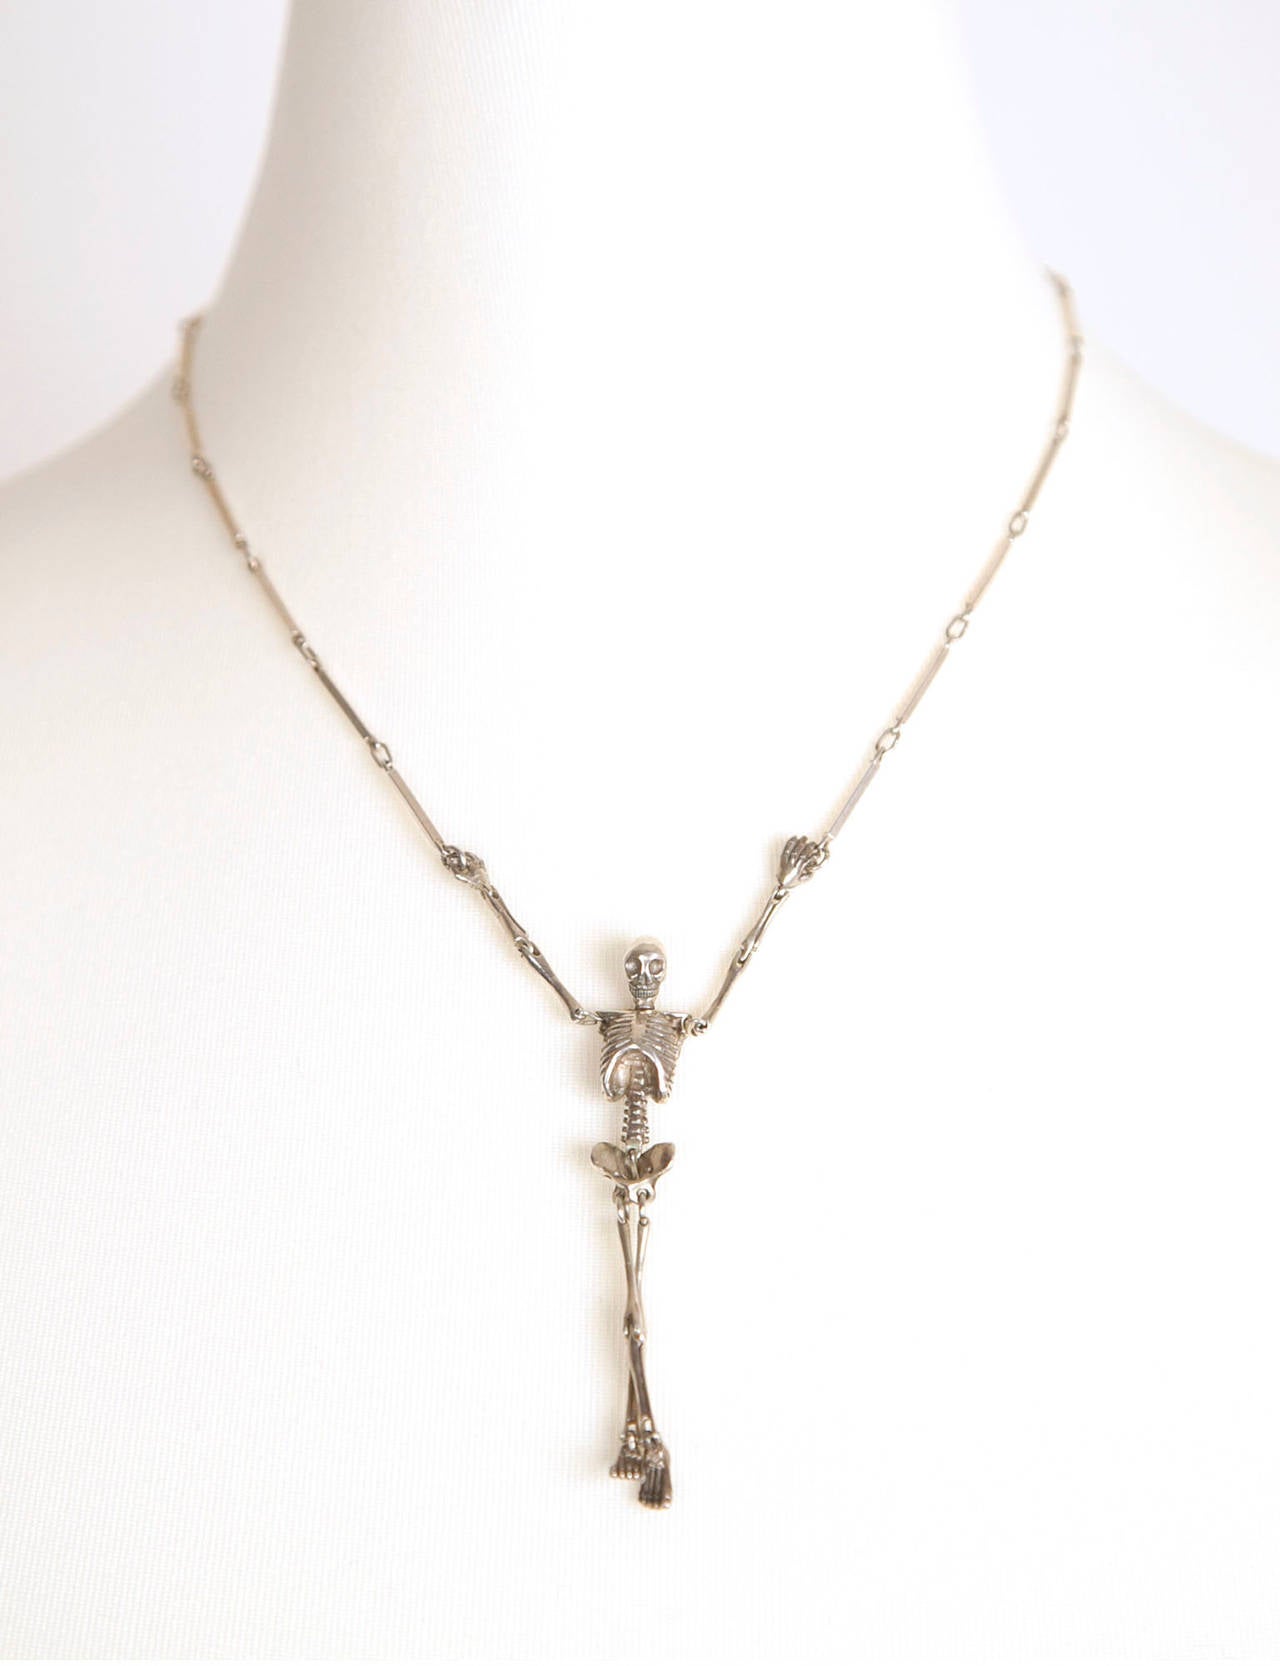 Vivienne Westwood Punk Skeleton Necklace from 1990's. Necklace is in sterling silver with anatomical moving body party and chain linked bones to punk it up even more. This is a true vintage item from The grande dame herself Vivienne Westwood. The